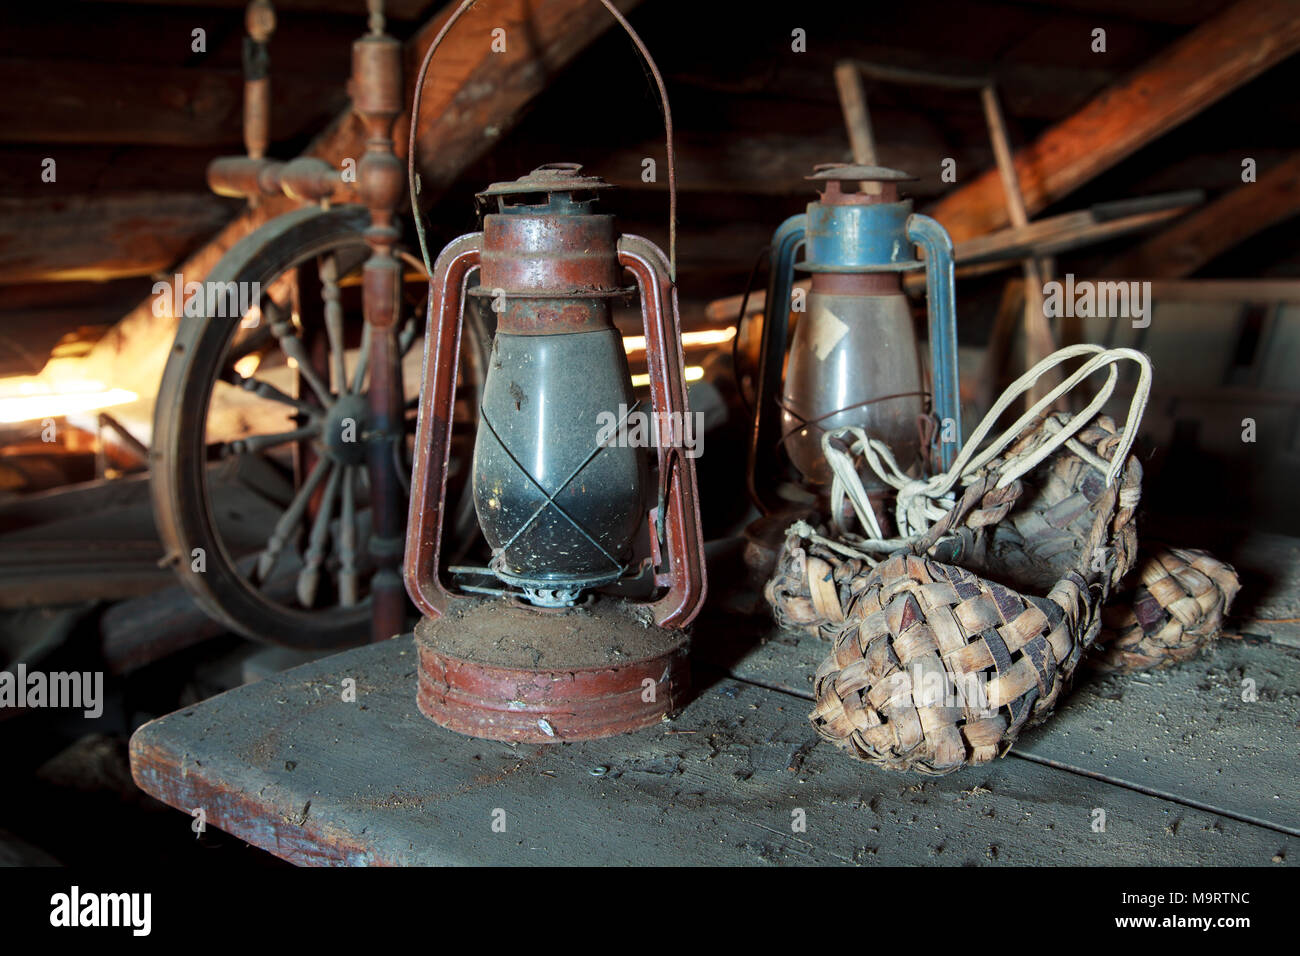 https://c8.alamy.com/comp/M9RTNC/russian-vintage-household-items-still-life-old-spinning-wheel-bast-shoes-and-a-kerosene-lamp-in-a-dusty-garret-in-the-country-house-selective-focu-M9RTNC.jpg